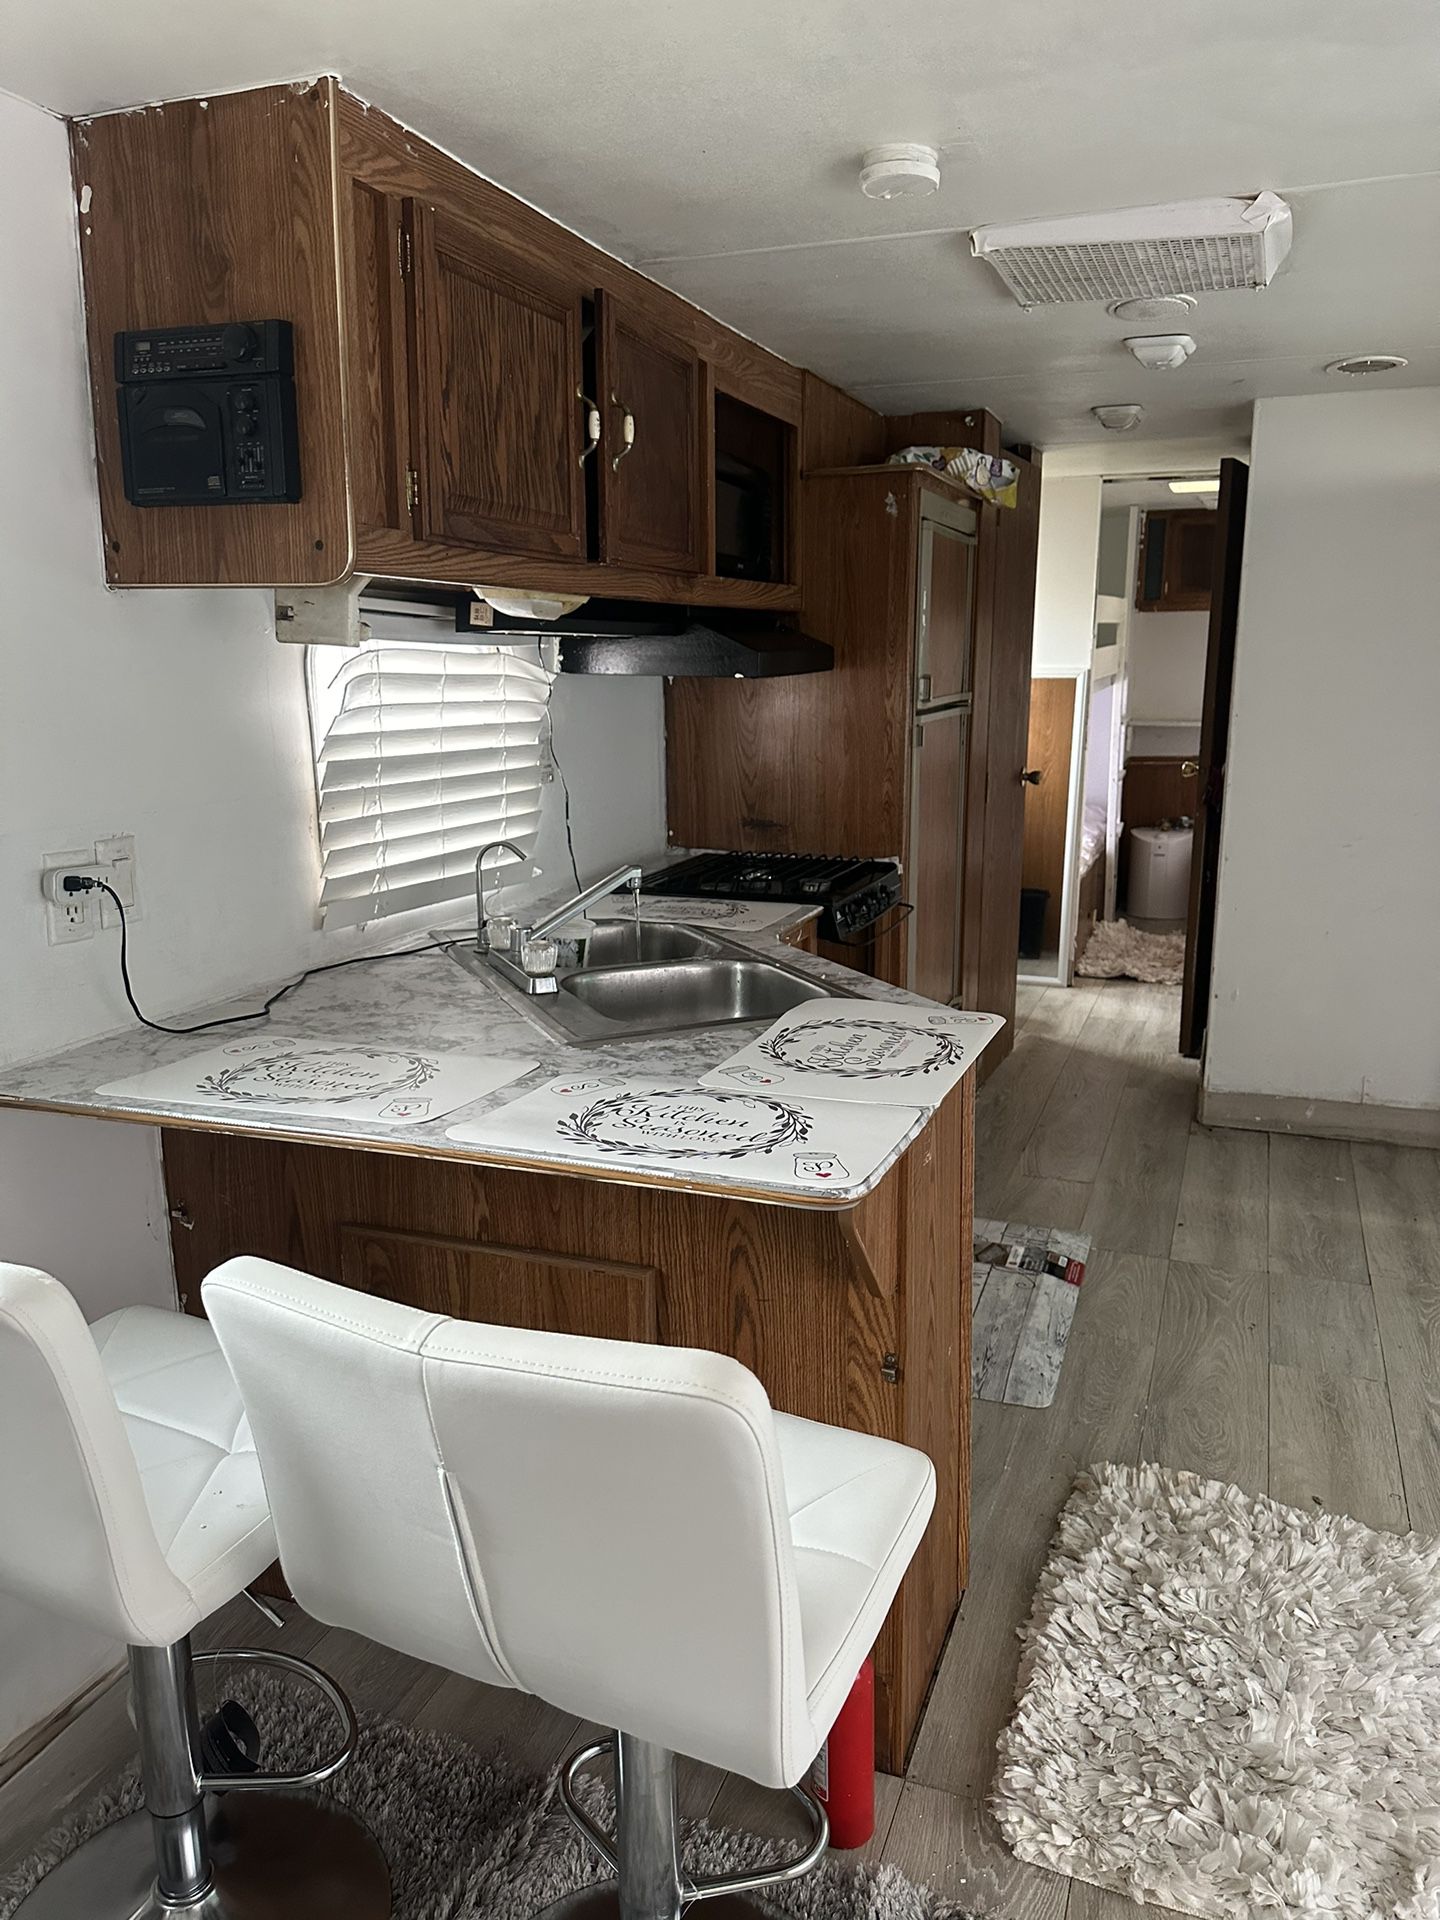  On sale 2000 Mallard by Fleetwood M-37K   It is a wonderful place to live, it's located in a centric area surrounded by Wal-Mart Costco Safeway store